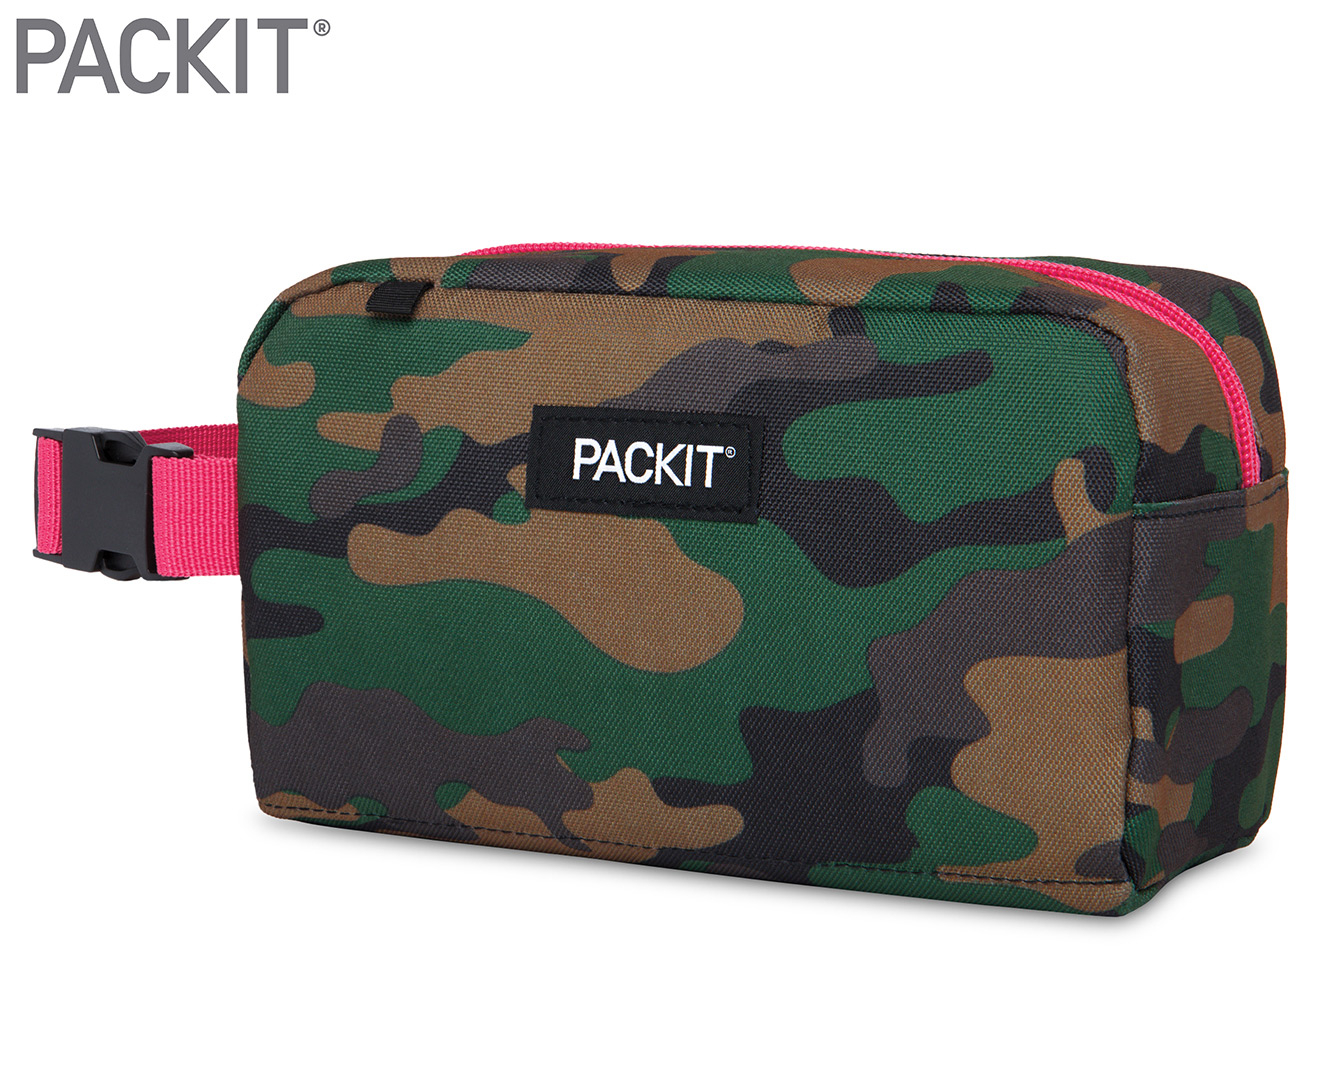 PackIt Freezable Lunch Bag Charcoal Camo